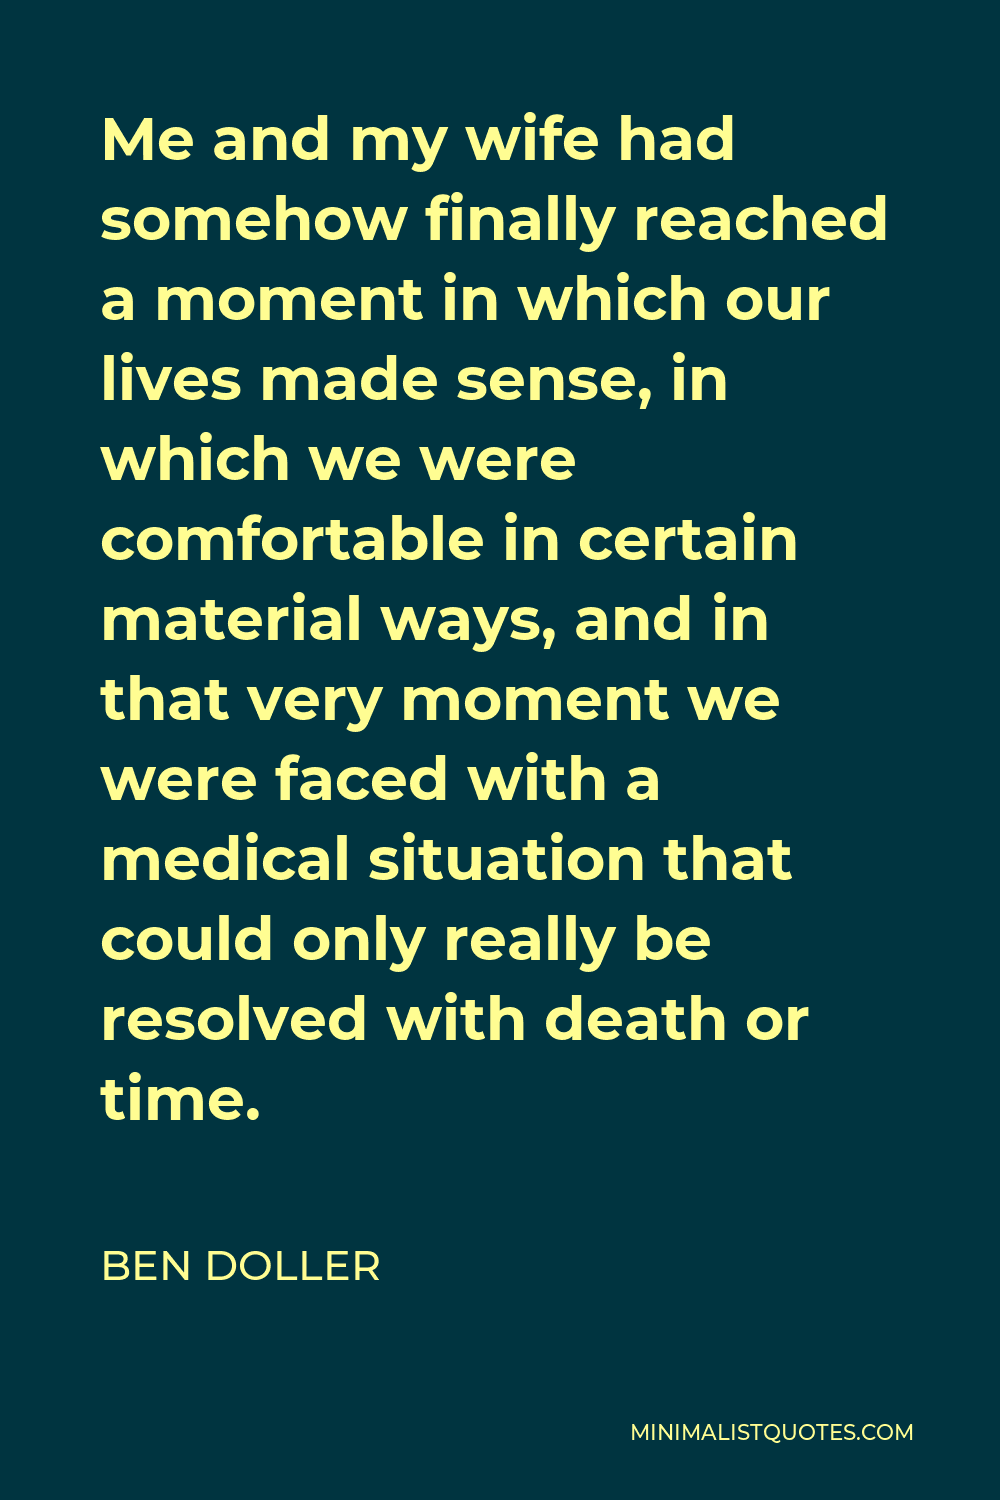 Ben Doller Quote - Me and my wife had somehow finally reached a moment in which our lives made sense, in which we were comfortable in certain material ways, and in that very moment we were faced with a medical situation that could only really be resolved with death or time.